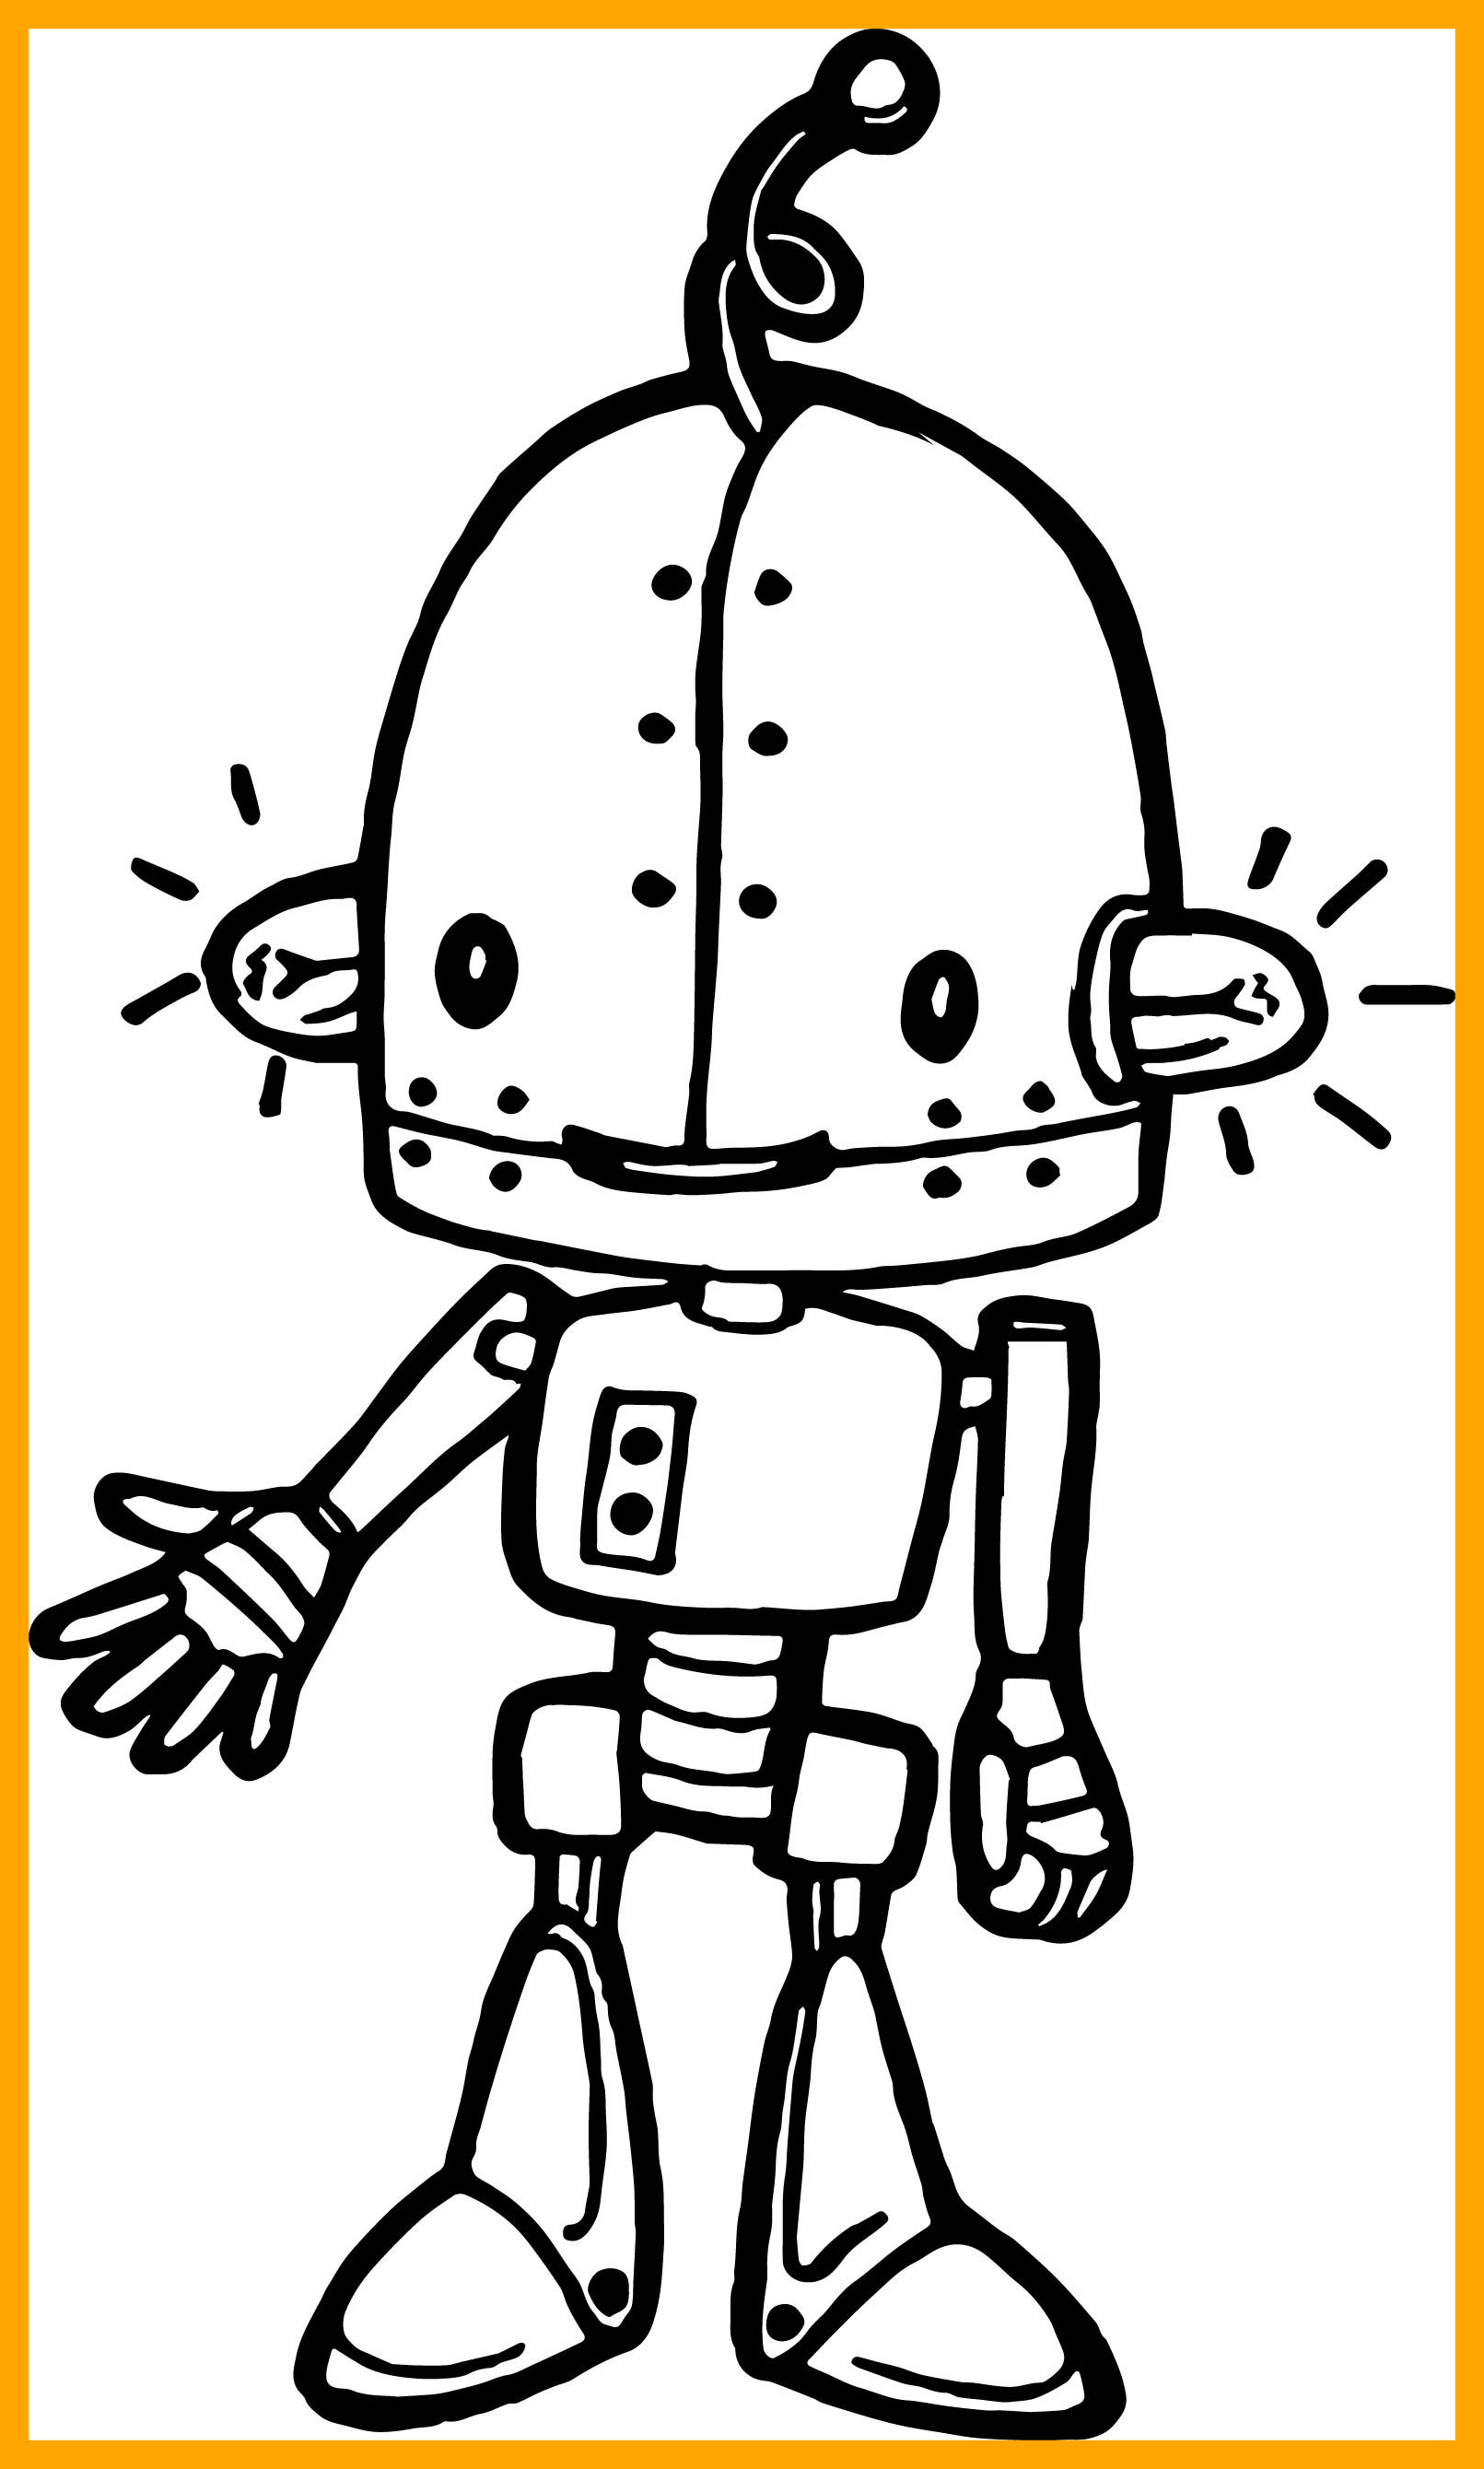 Cute Robot Coloring Pages at GetColorings.com | Free printable